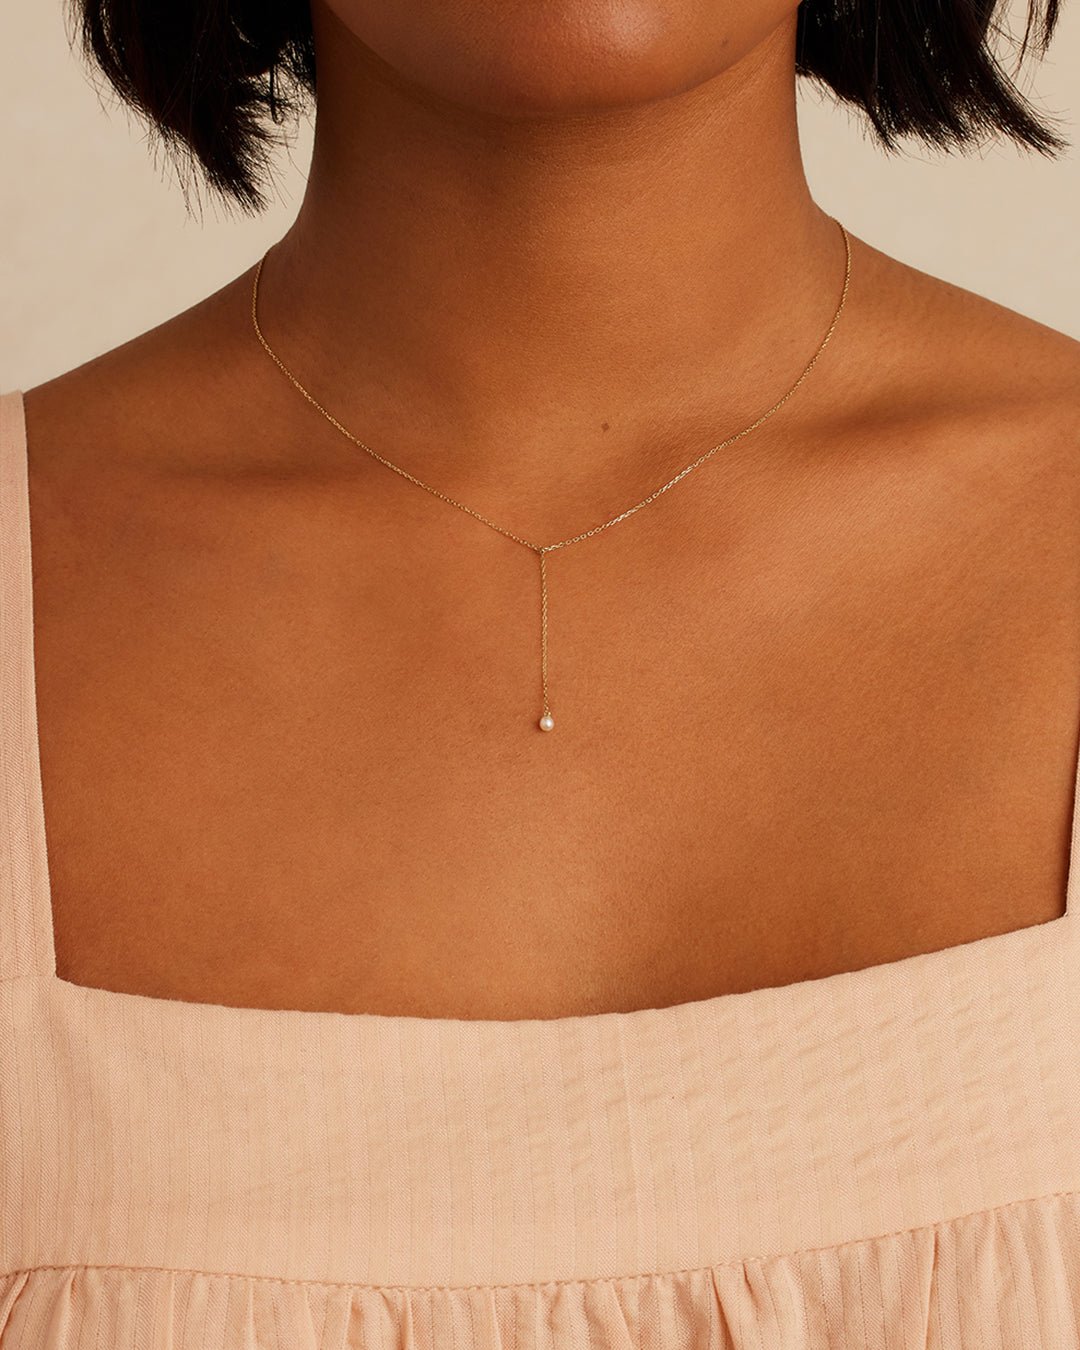 Pearl Lariat Necklace || option::14k Solid Gold